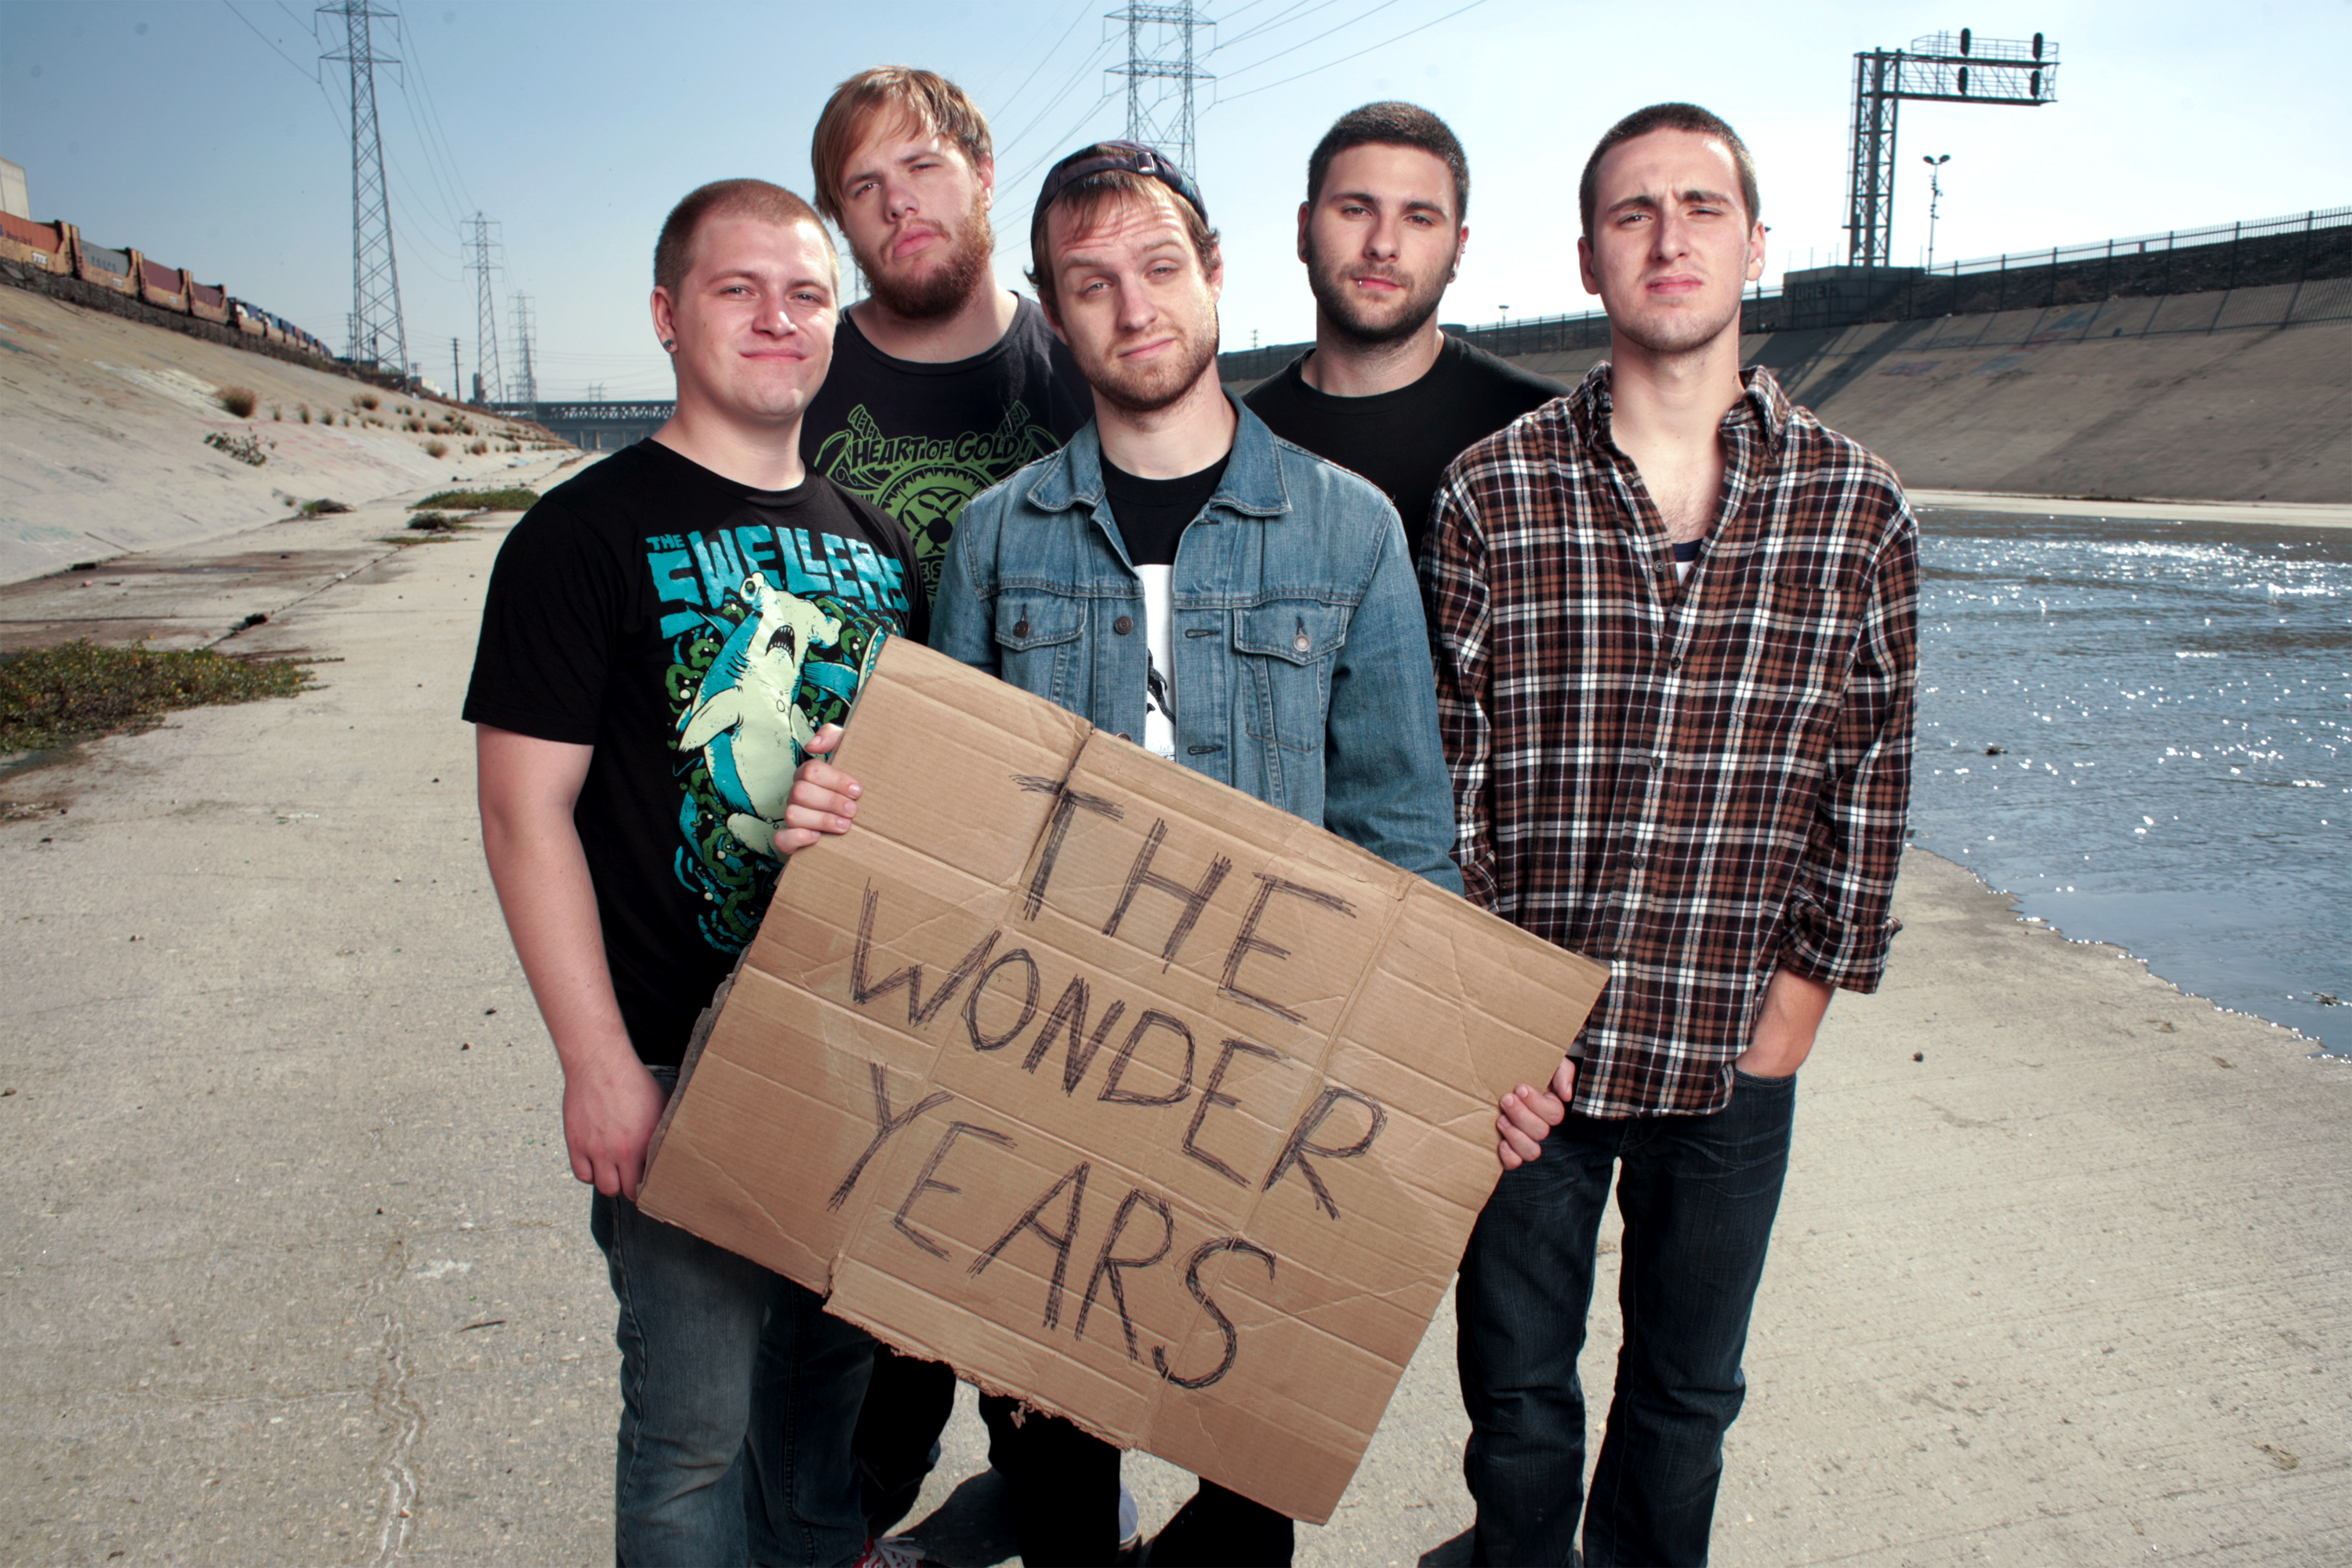 Waiting for the Wonder Years